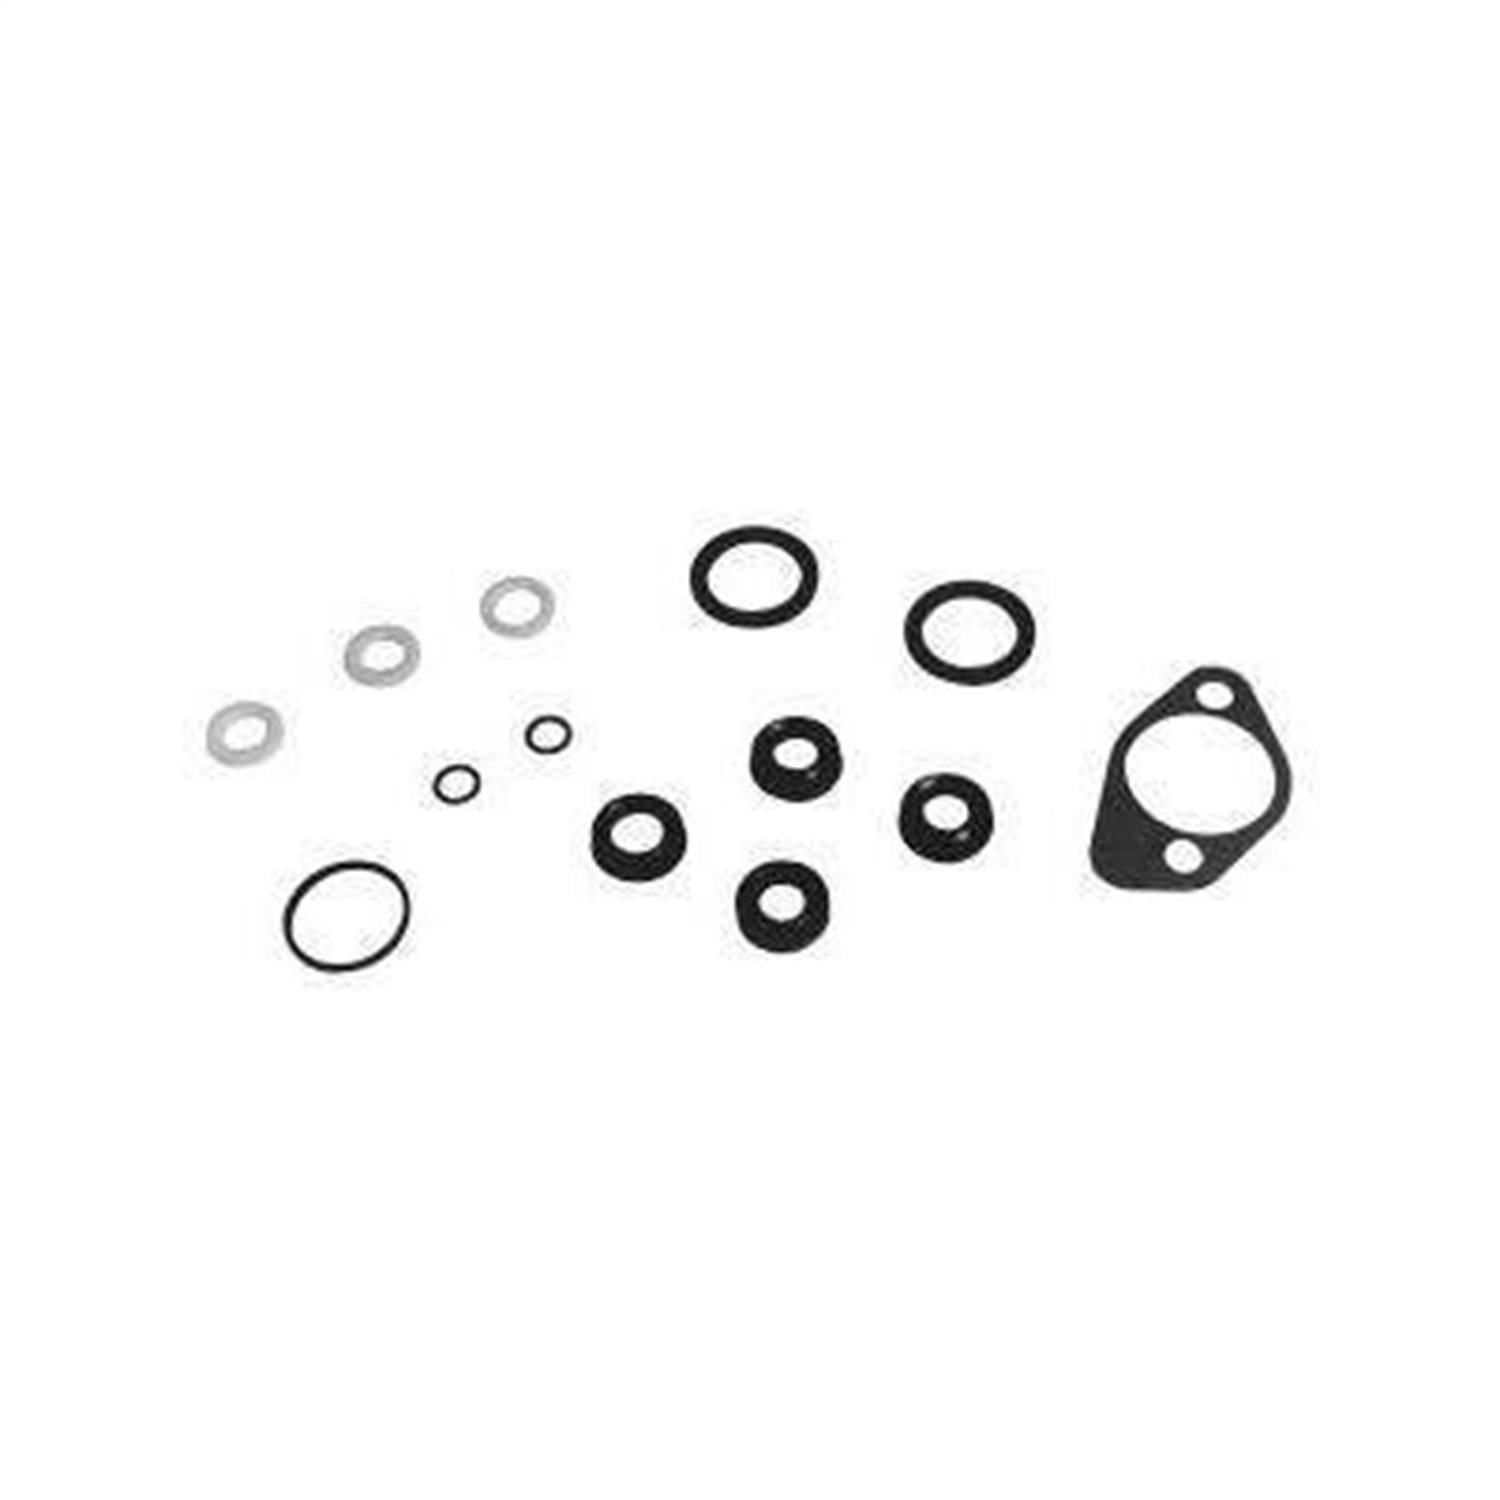 Power Steering Control Valve Seal Kit 1964-1970 Ford Mustang